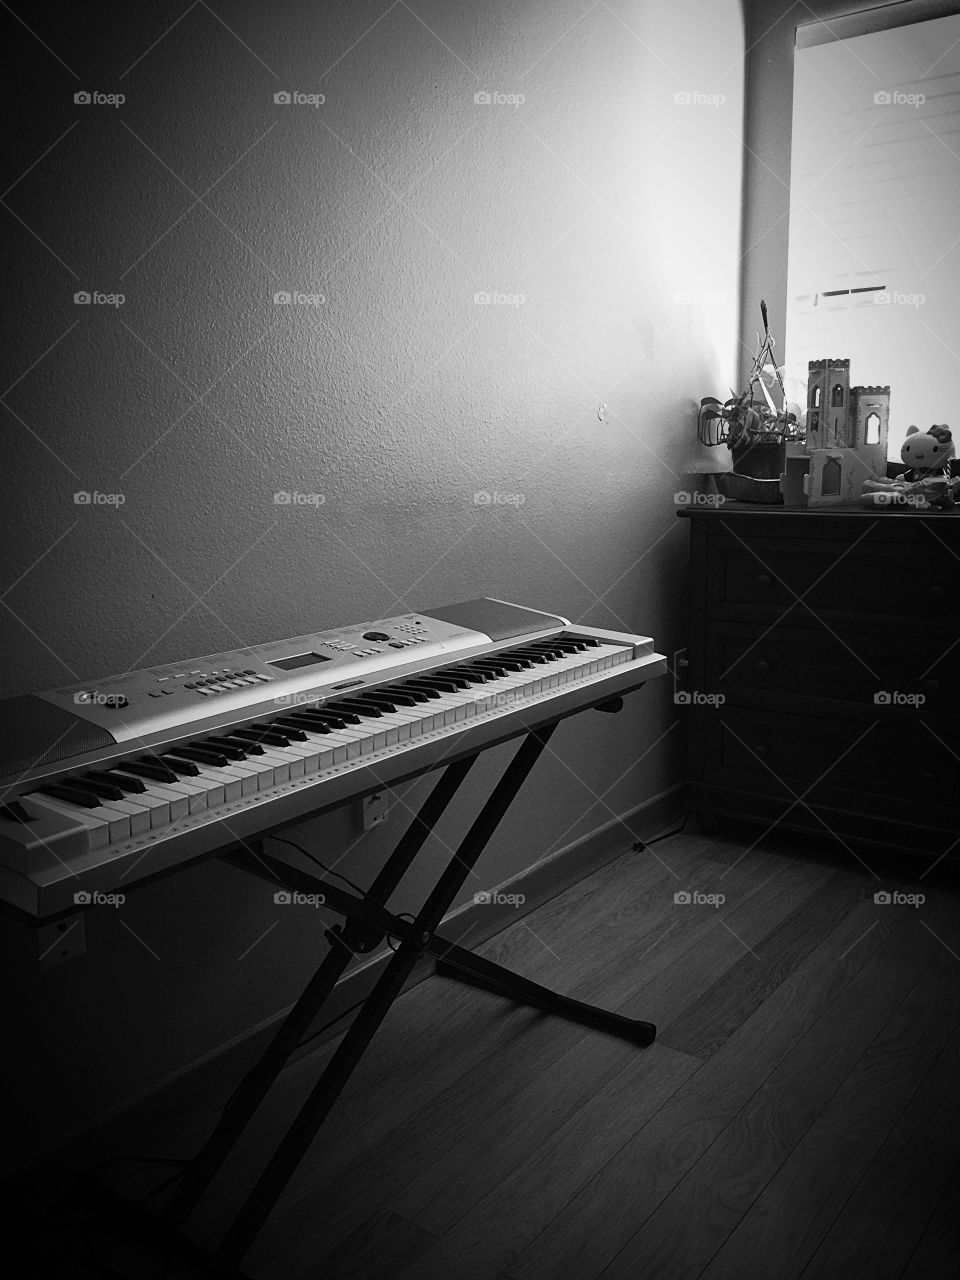 The lonesome keyboard 